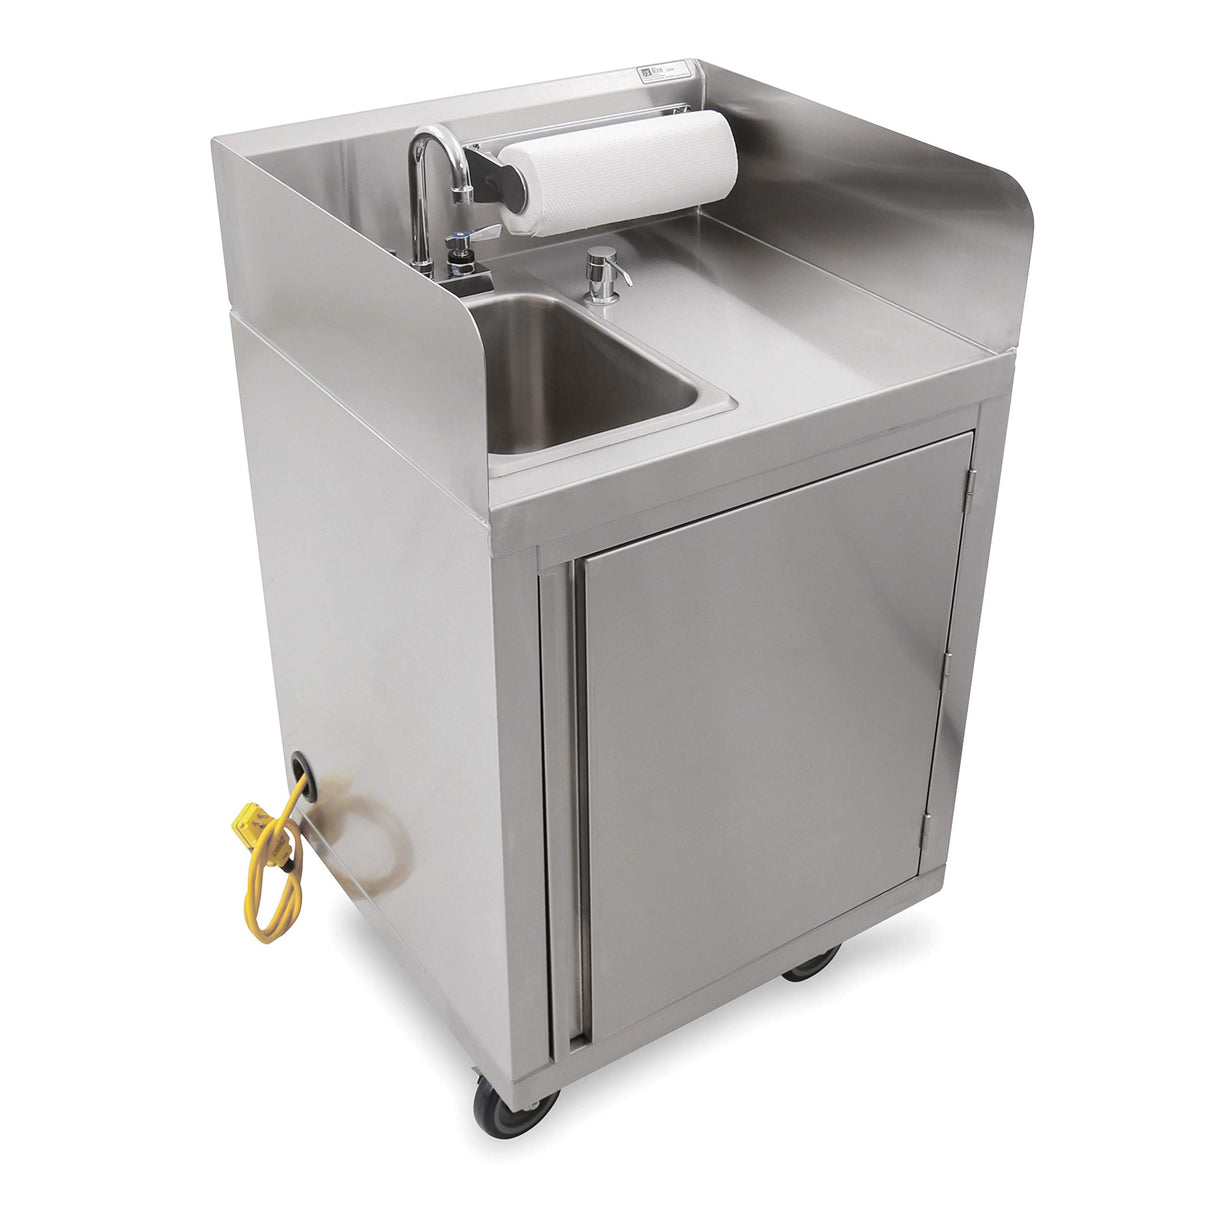 John Boos MHS-2624 Commercial Stainless Steel Mobile Hand Wash Station with Integrated 2.5 Gallon Water Heater, 5 Clean and 6 Gray Tanks